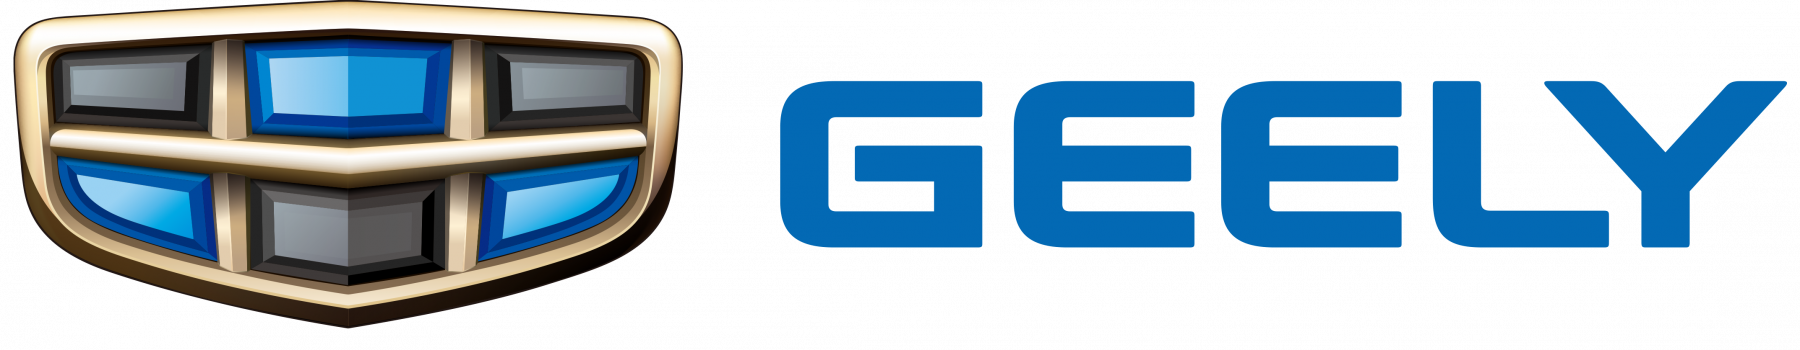 geely_logo.png